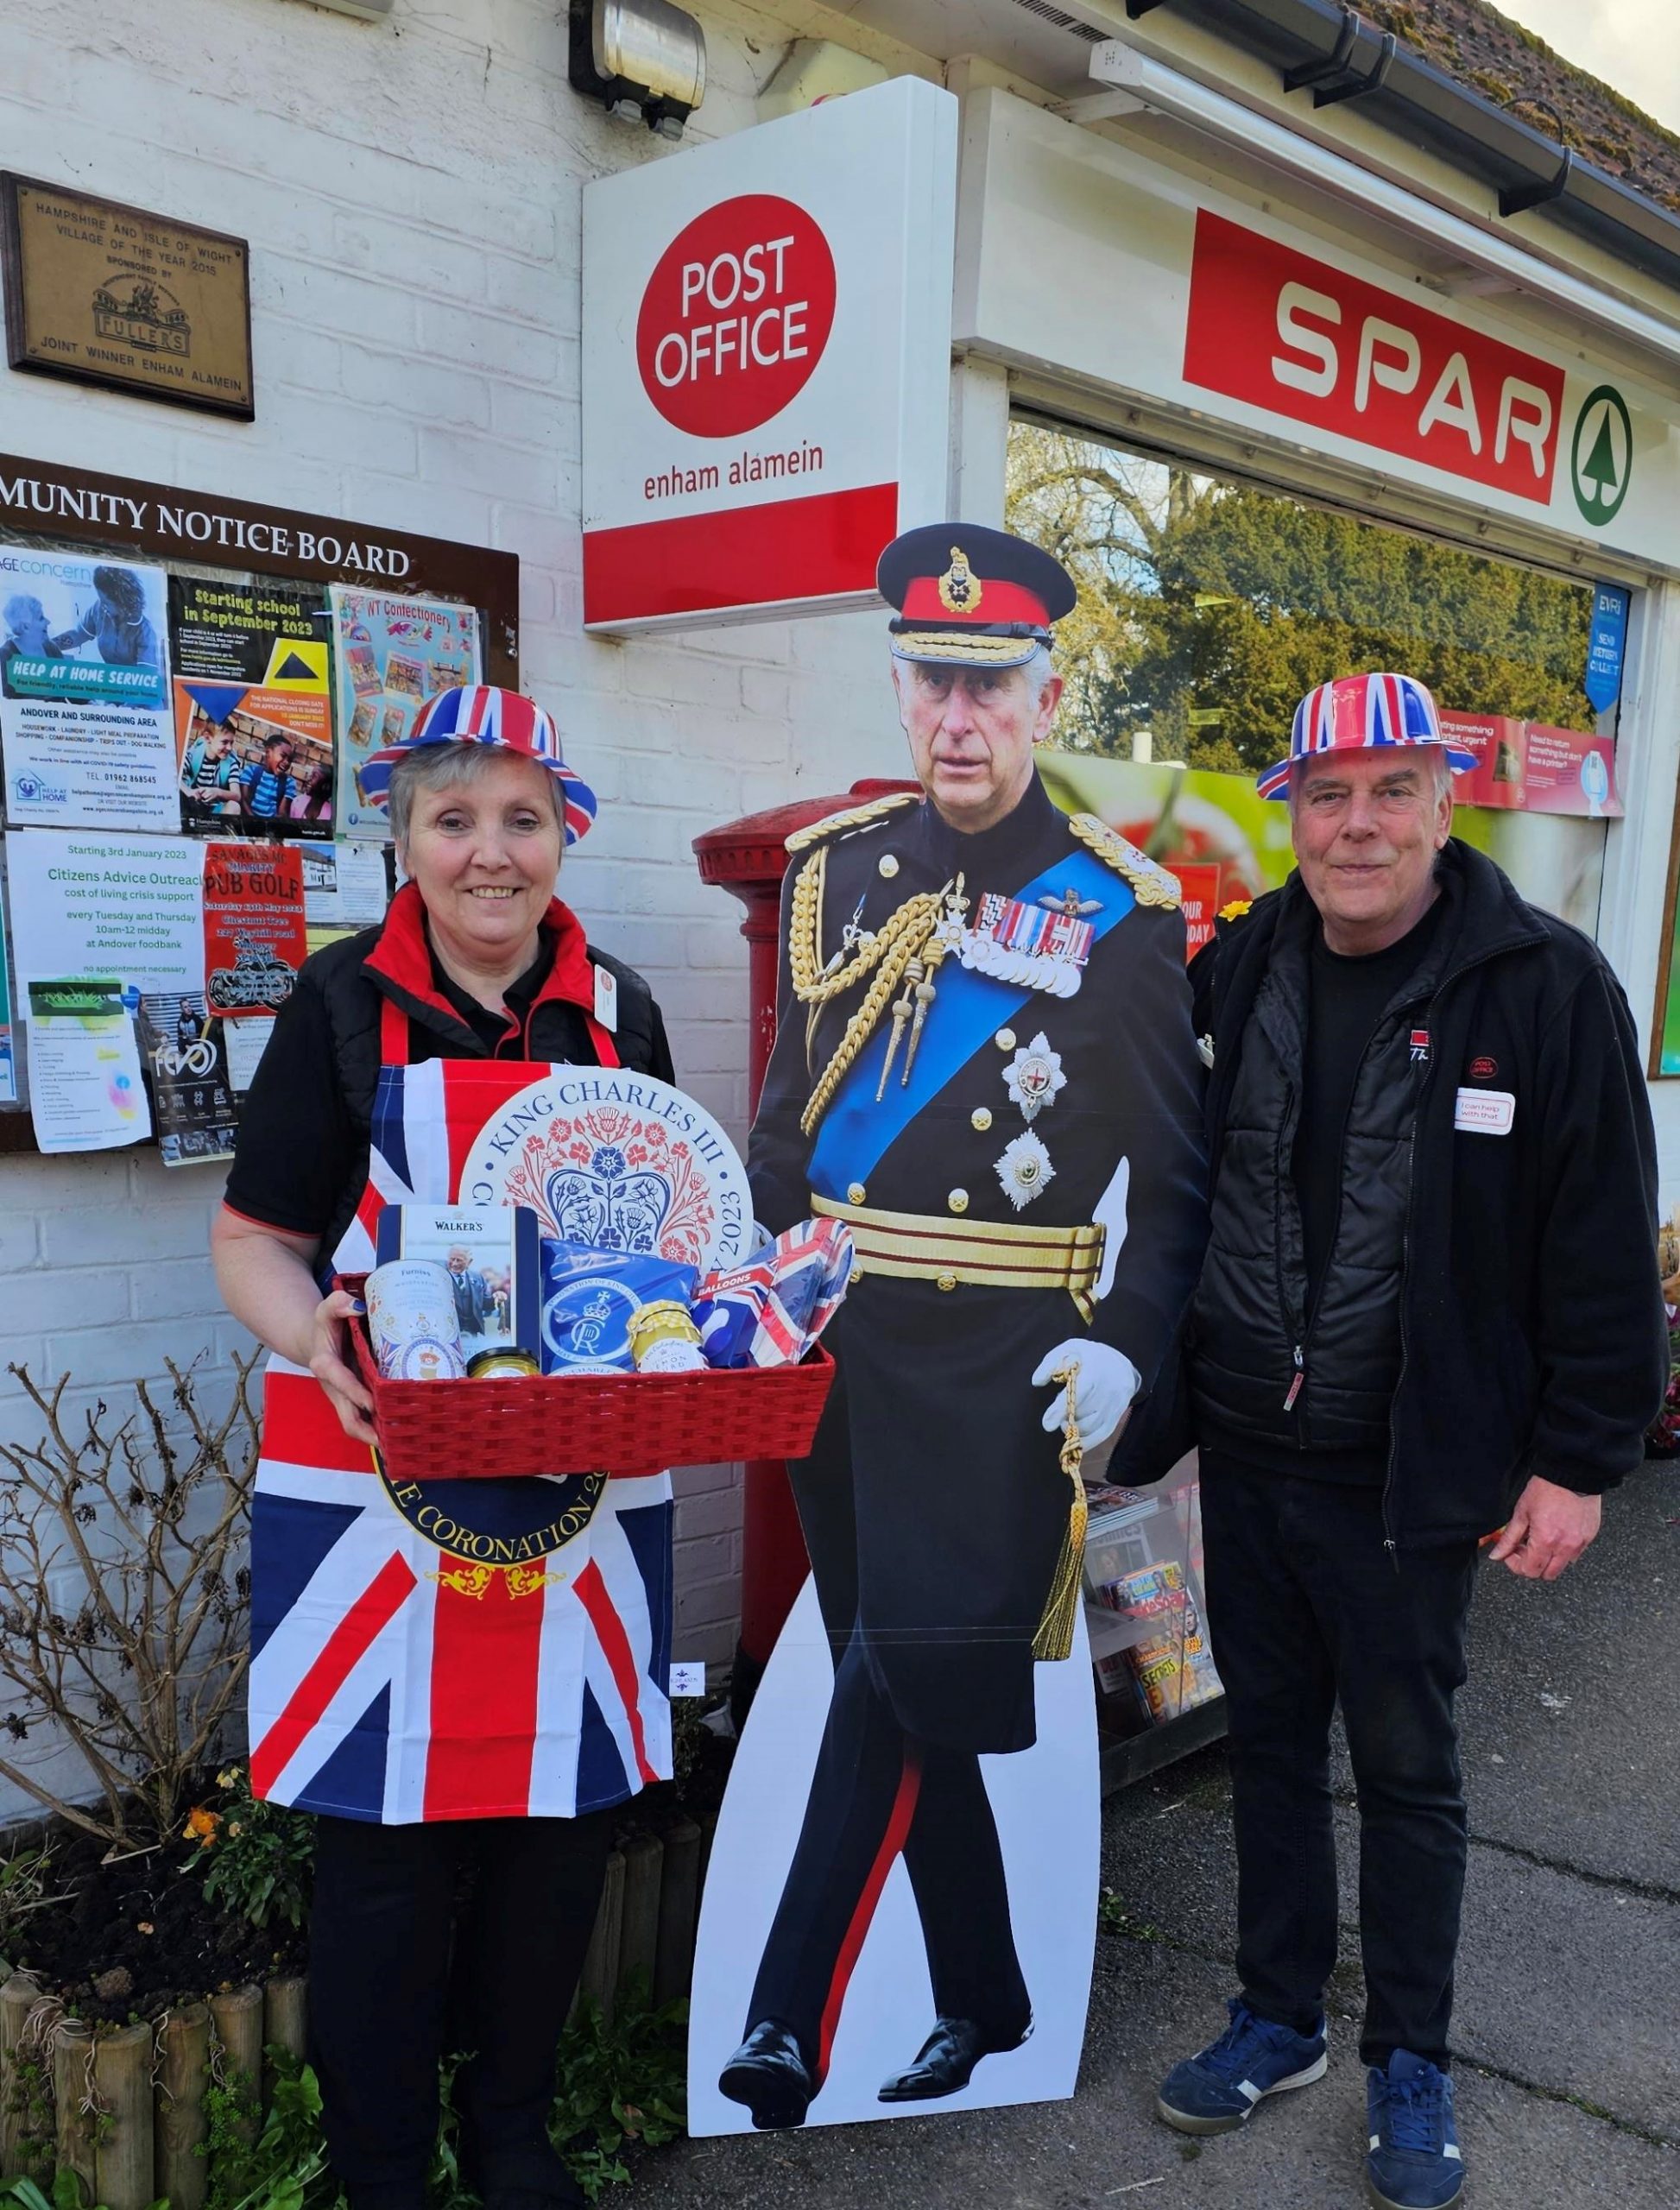 Local store to host big Coronation party for Enham Alamein community